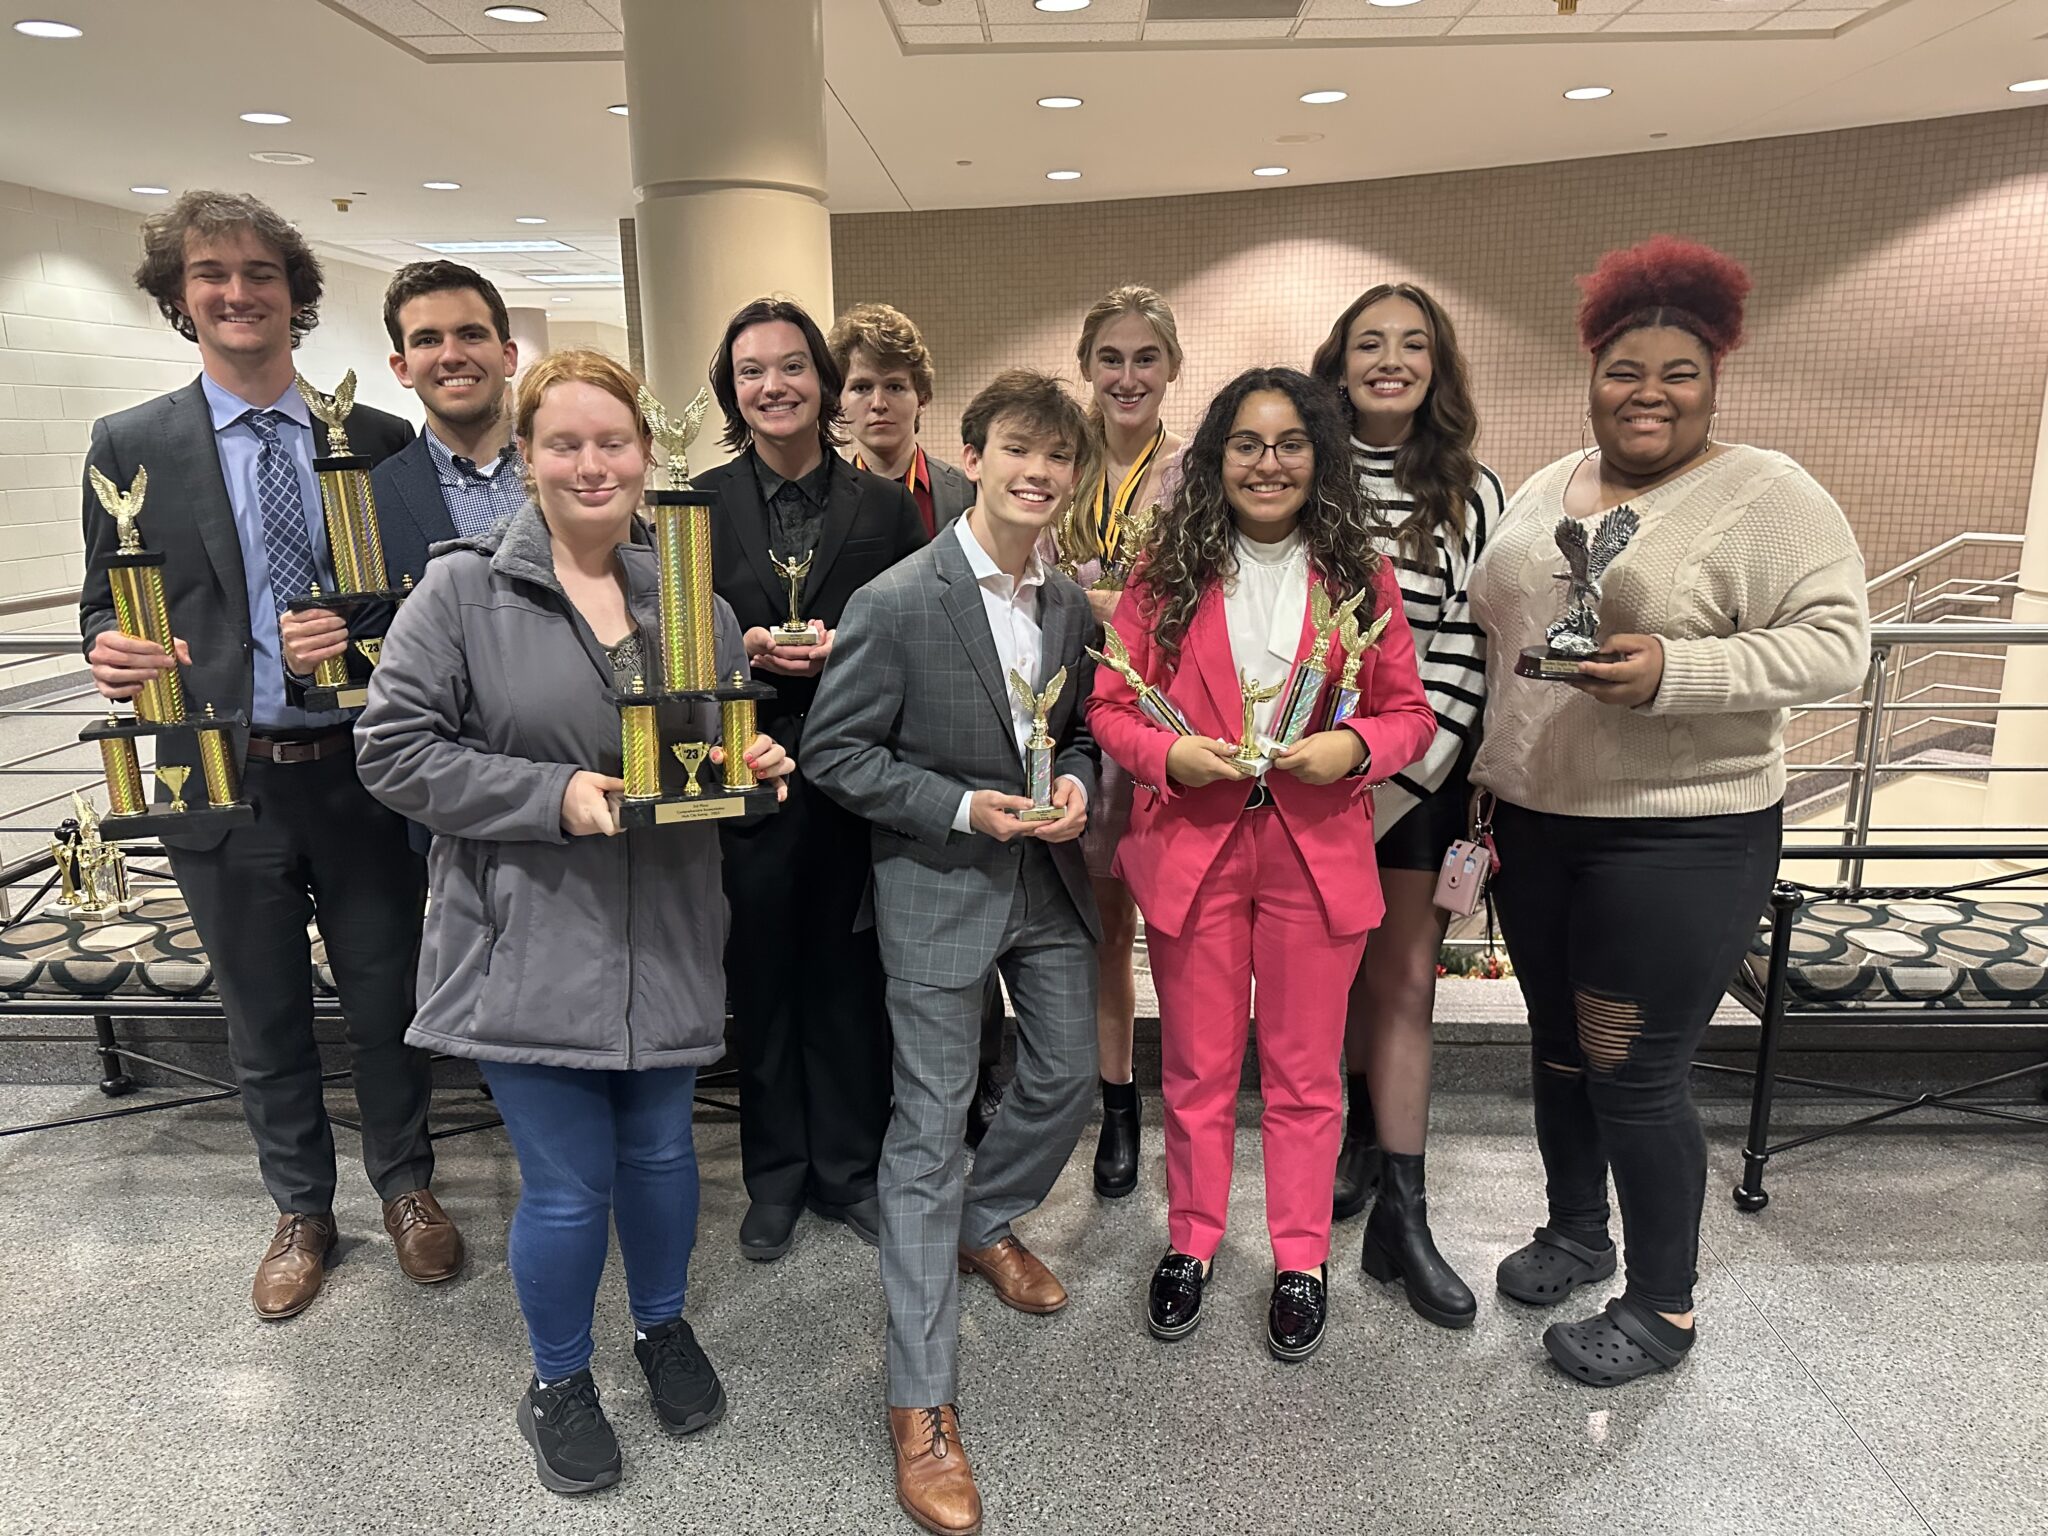 Eight members of the Tennessee Speech and Debate Society and their director, Abigail Barnes, pose for a group photo and hold up several trophies they have won.